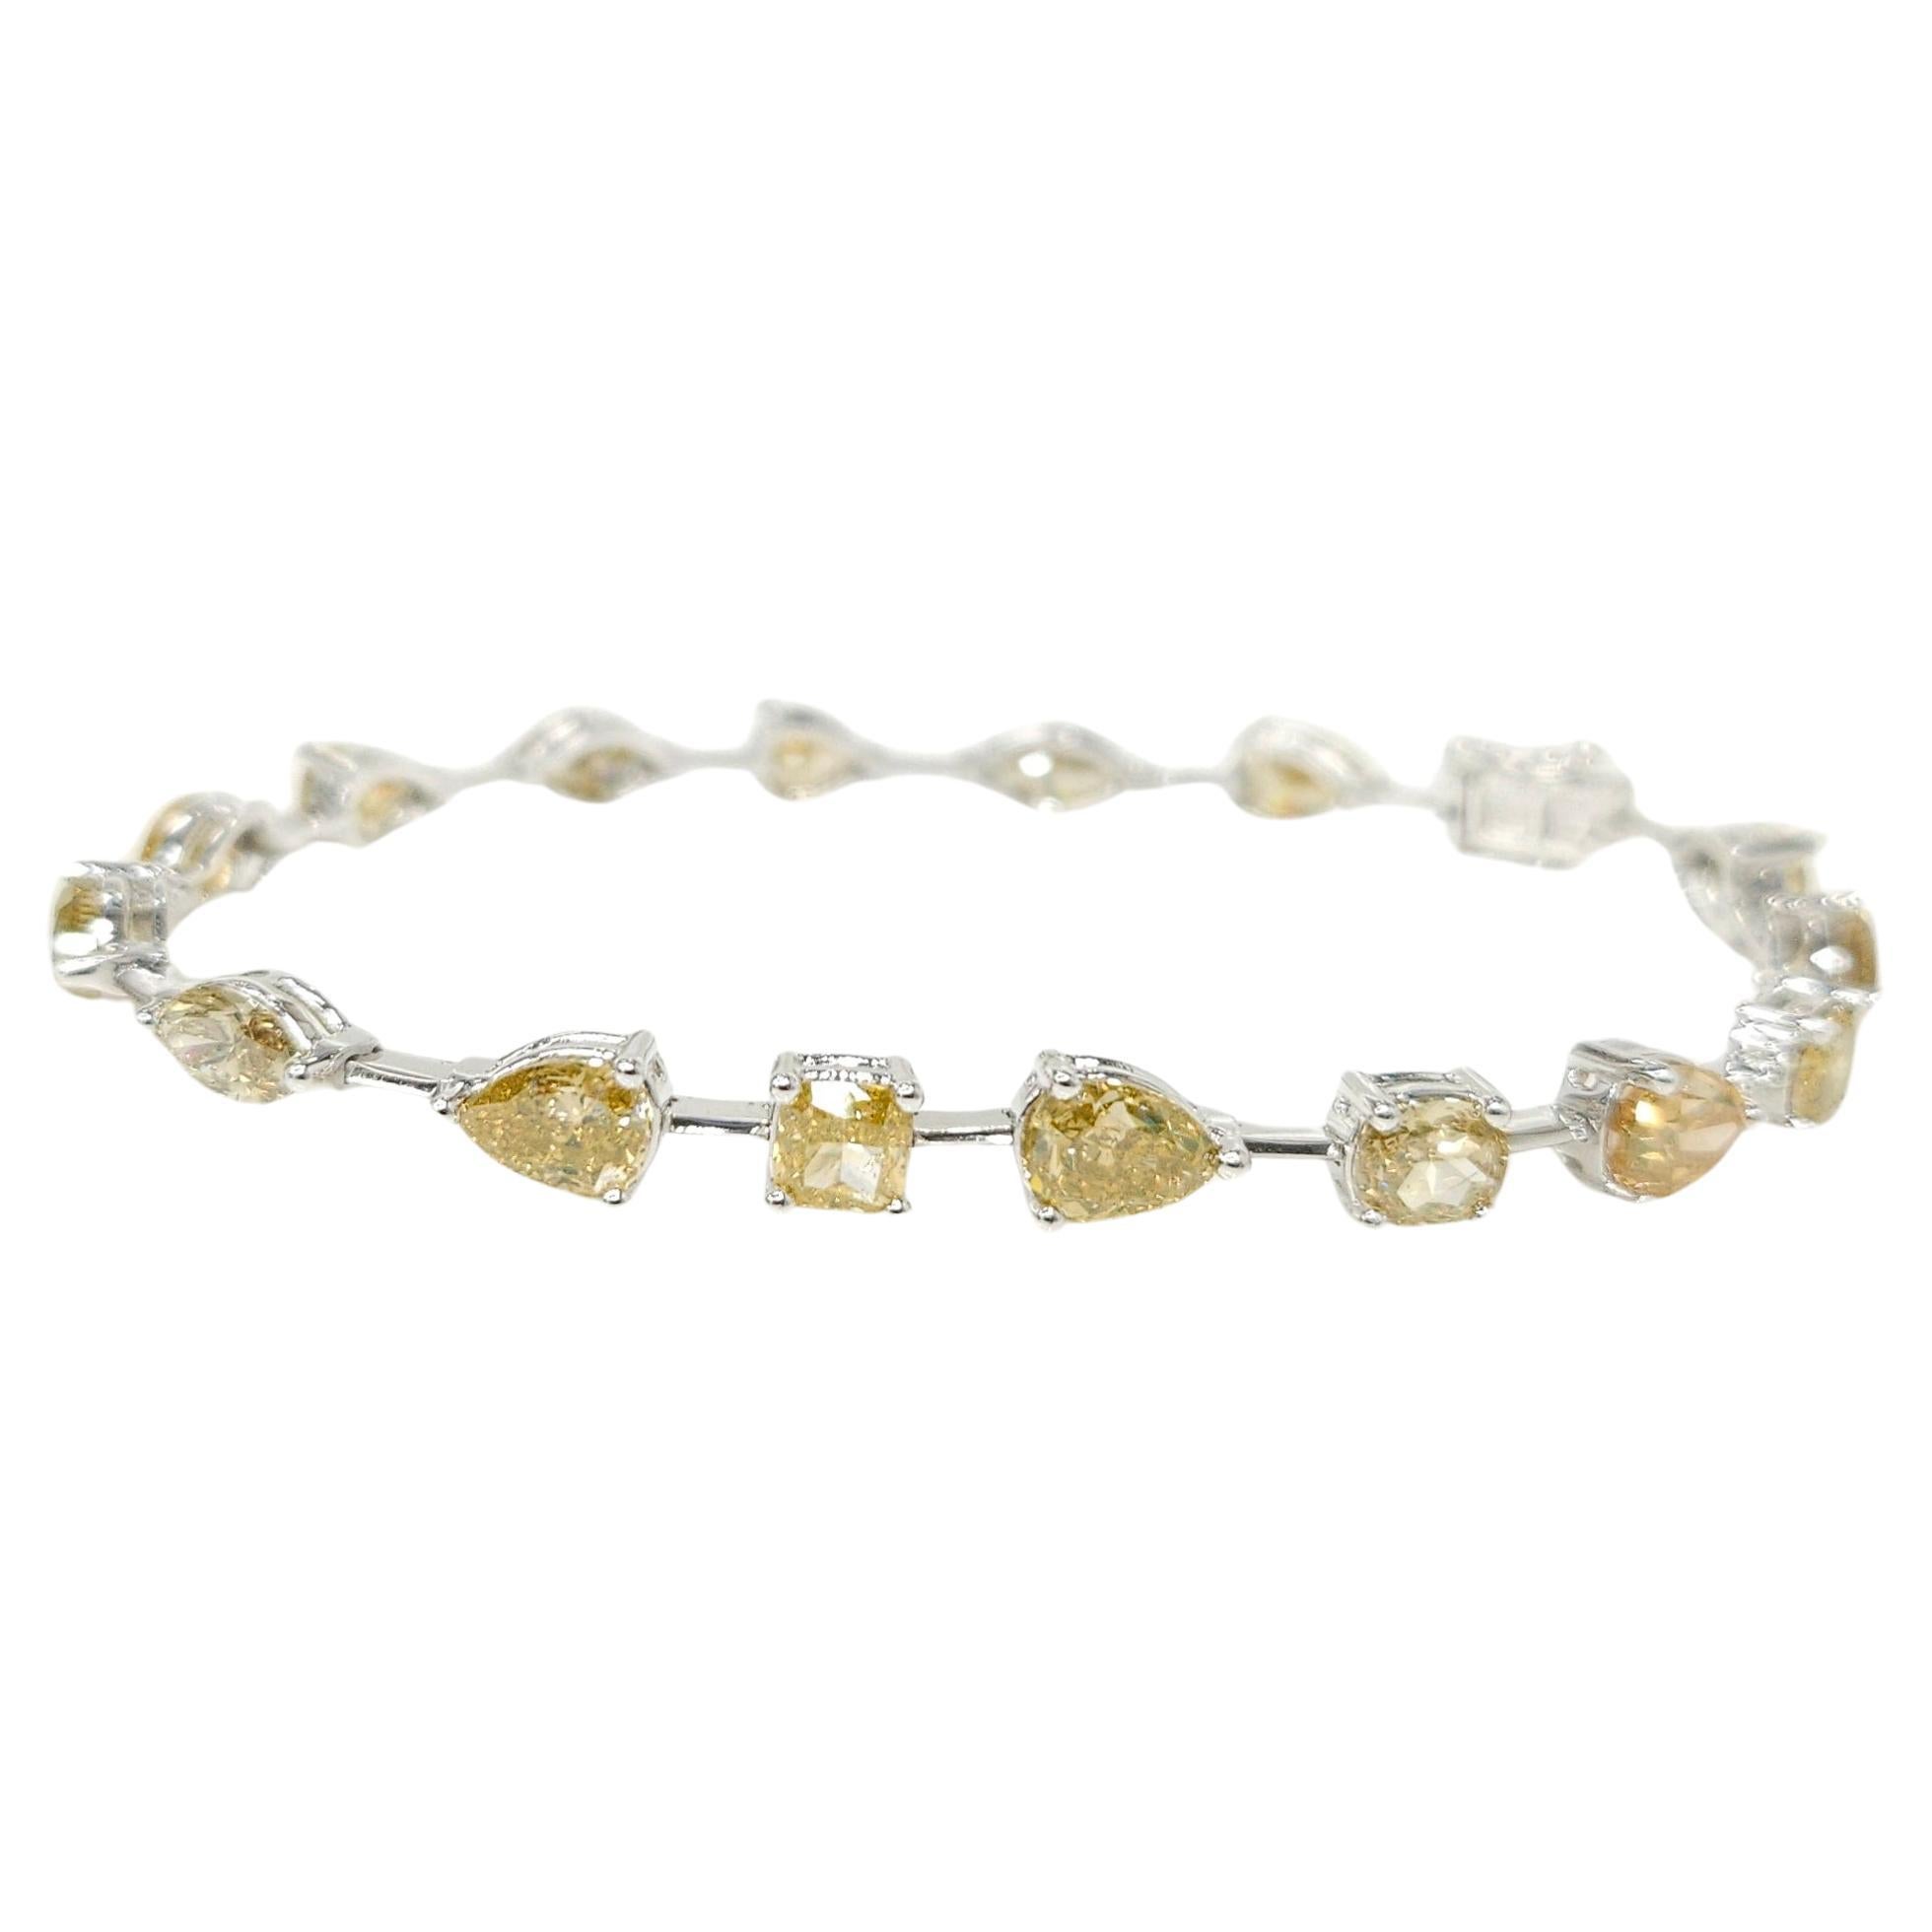 7.69 Carat Mixed Shaped Fancy Color Natural Diamond Tennis Bracelet in 18K Gold For Sale